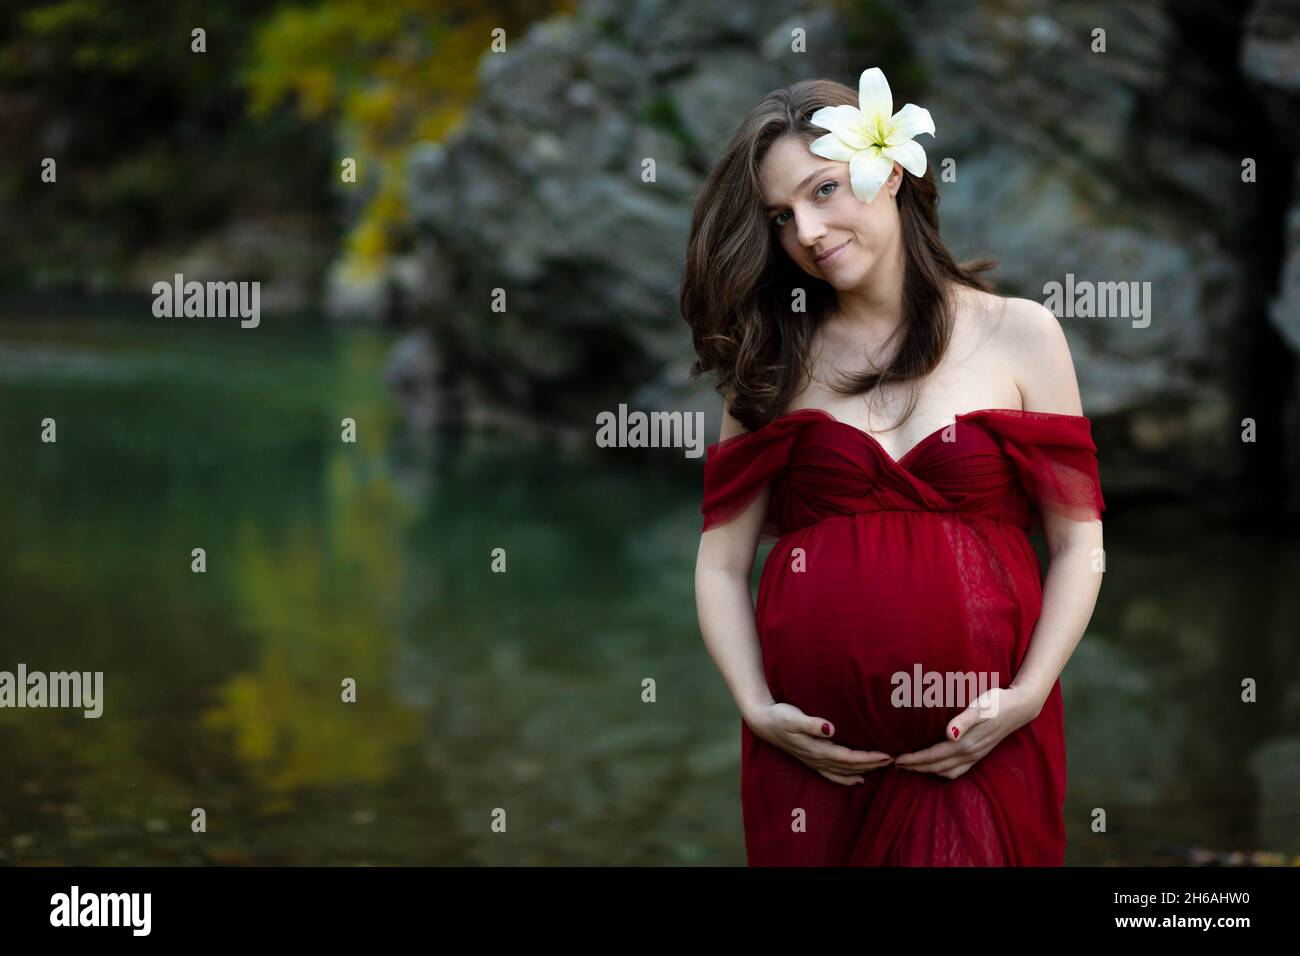 Young, elegant, blonde pregnant woman standing in the river in red dress, white flower behind her ear Stock Photo